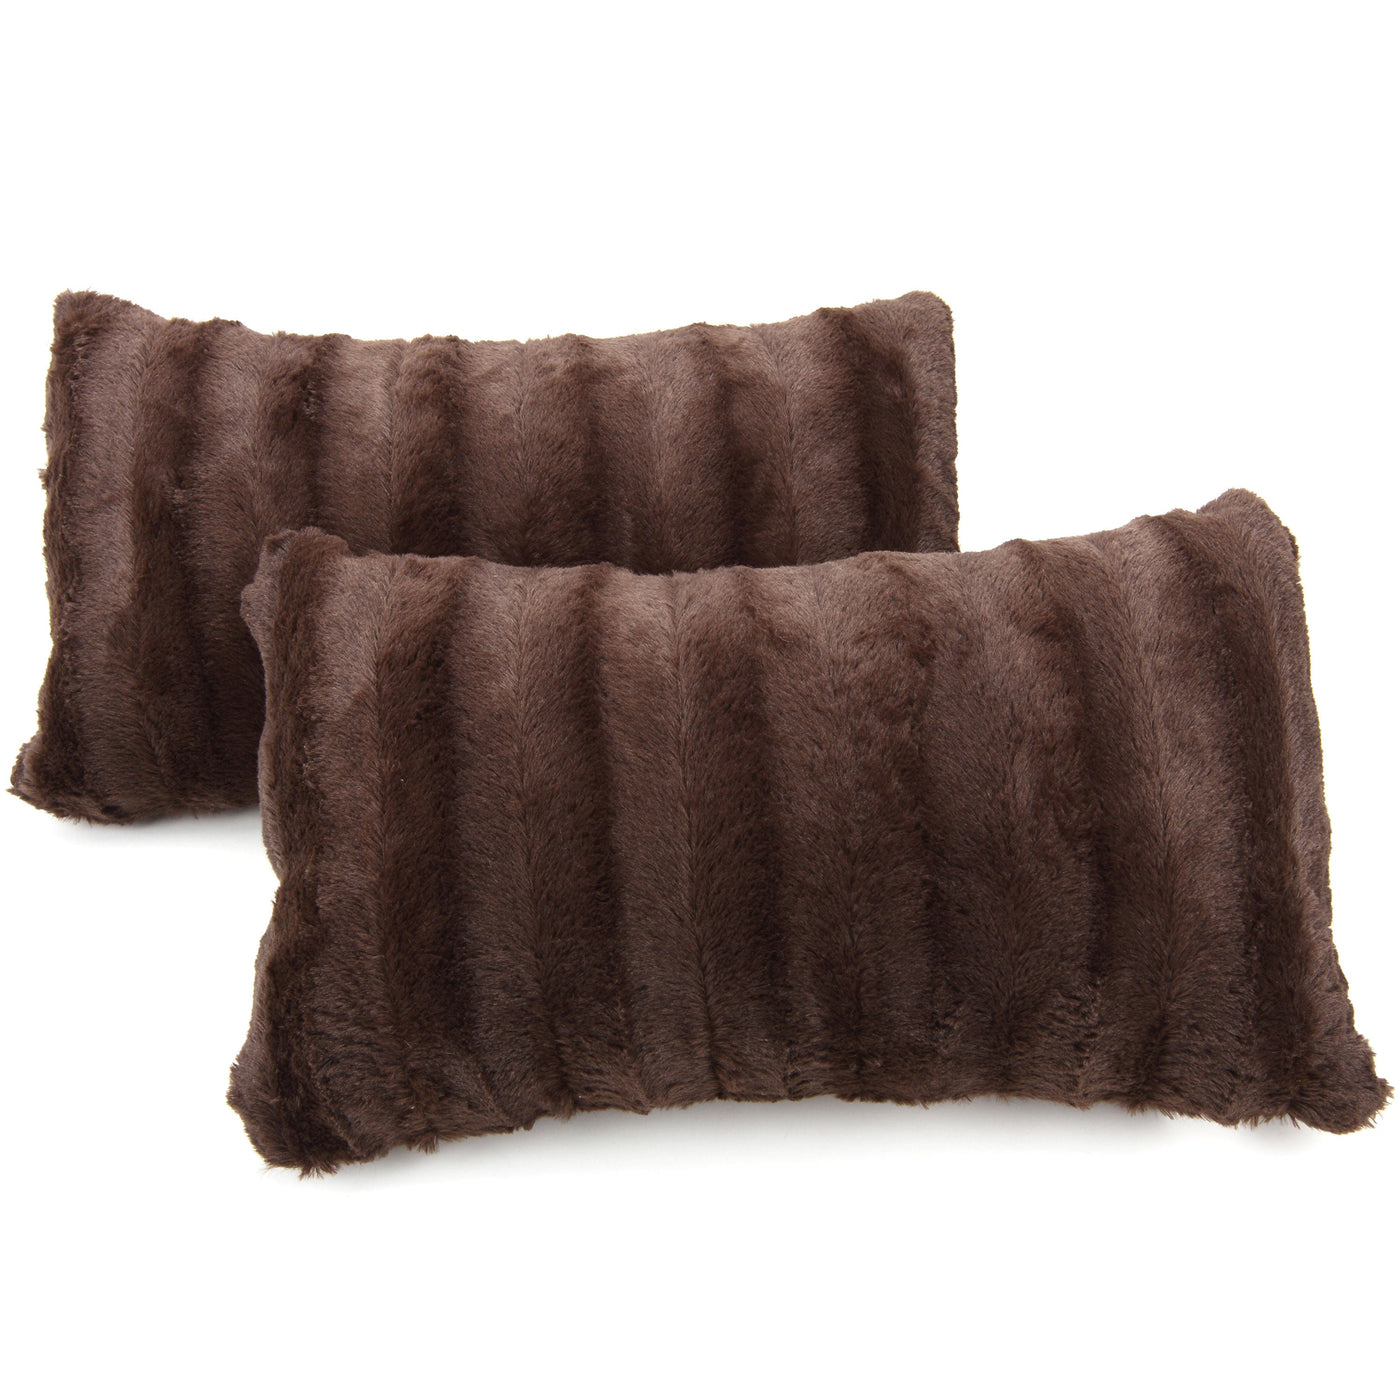 https://www.cheercollection.com/cdn/shop/products/cheer-collection-set-of-2-decorative-throw-pillows-reversible-faux-fur-to-microplush-accent-pillows-by-12x-20-334852_1400x.jpg?v=1671778469